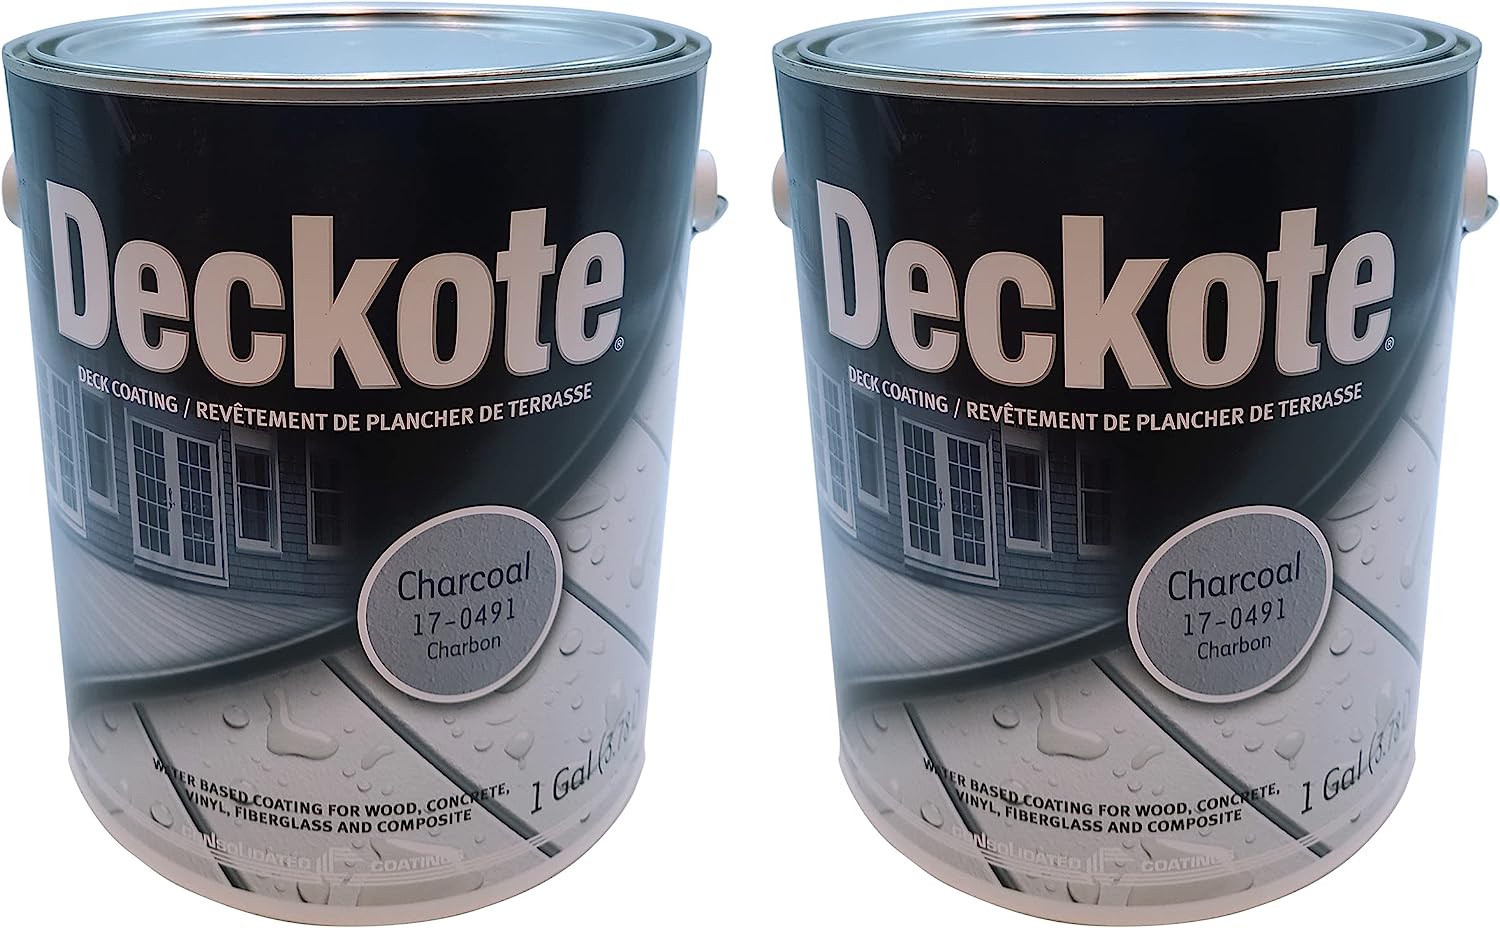 Deckote Charcoal 1 Gallon Deck Coating – UV Protection [...]